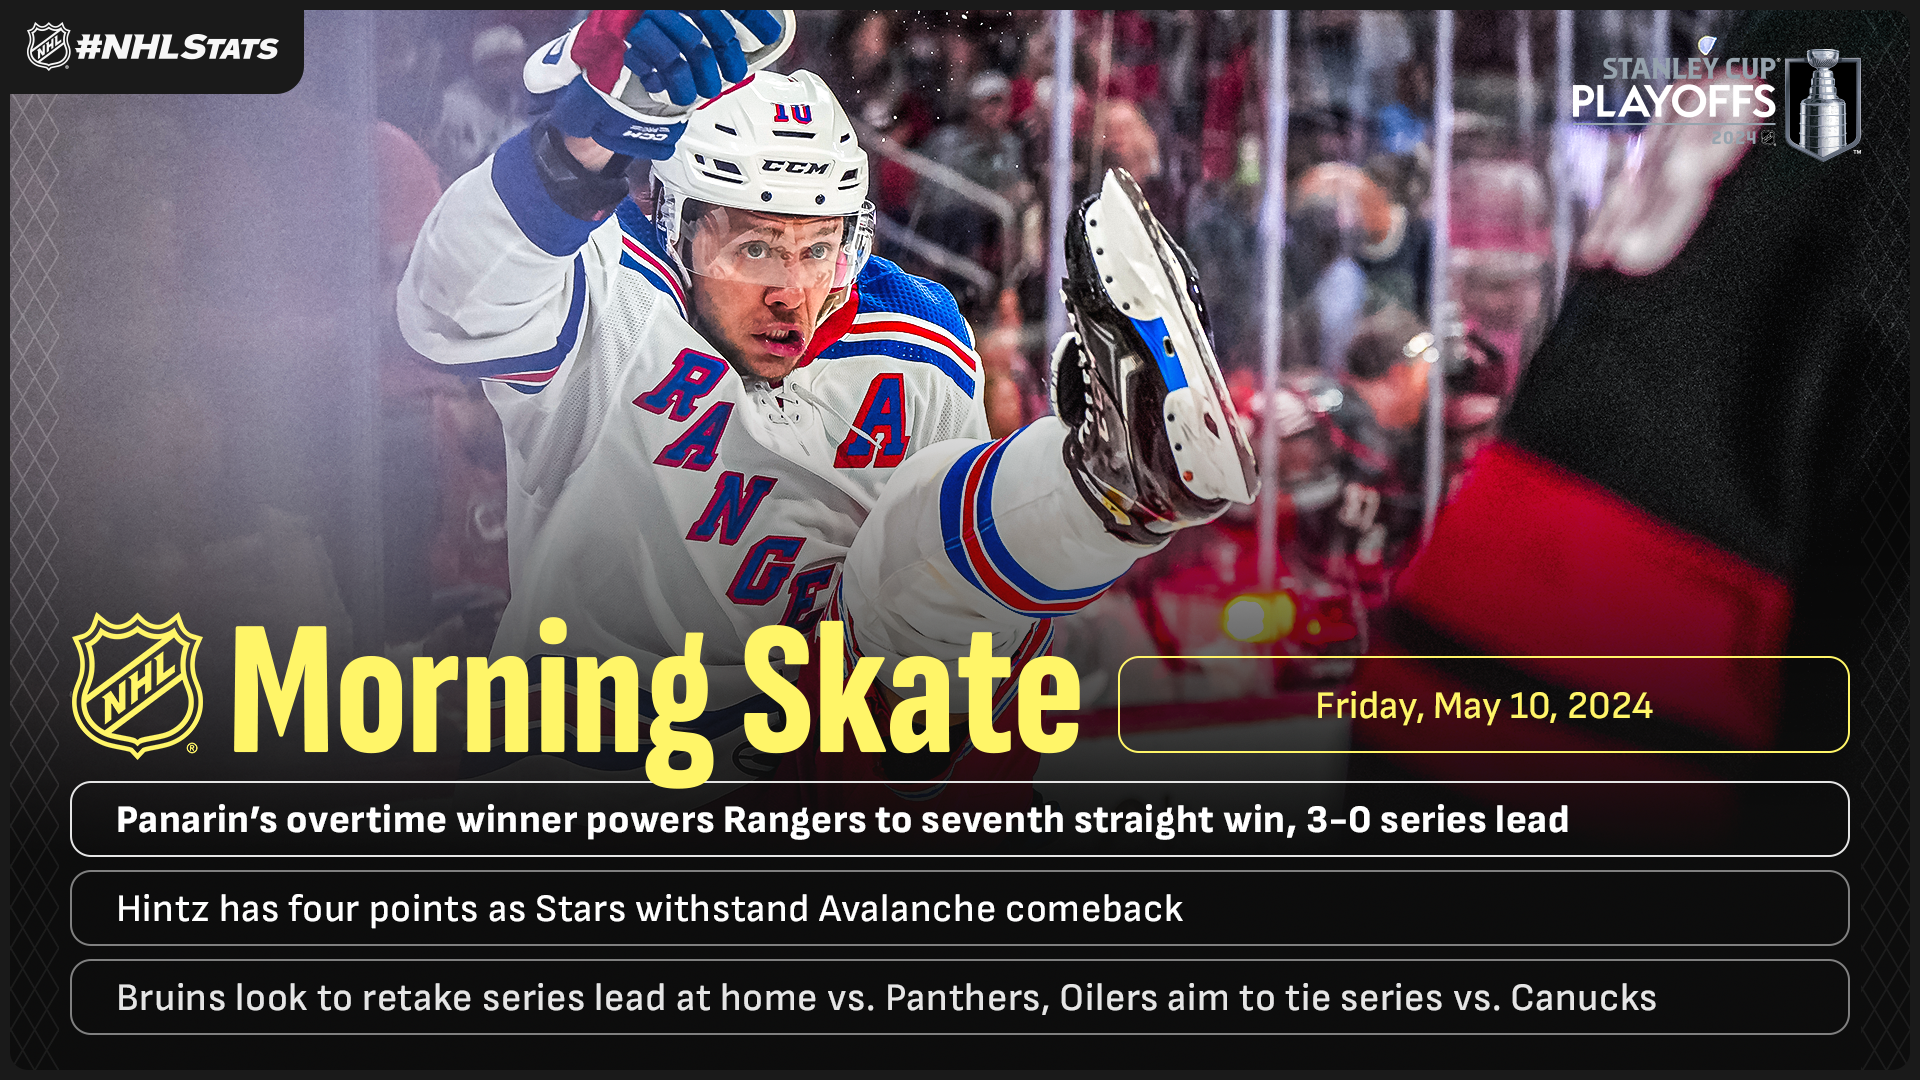 NHL Morning Skate: Stanley Cup Playoffs Edition – May 10, 2024